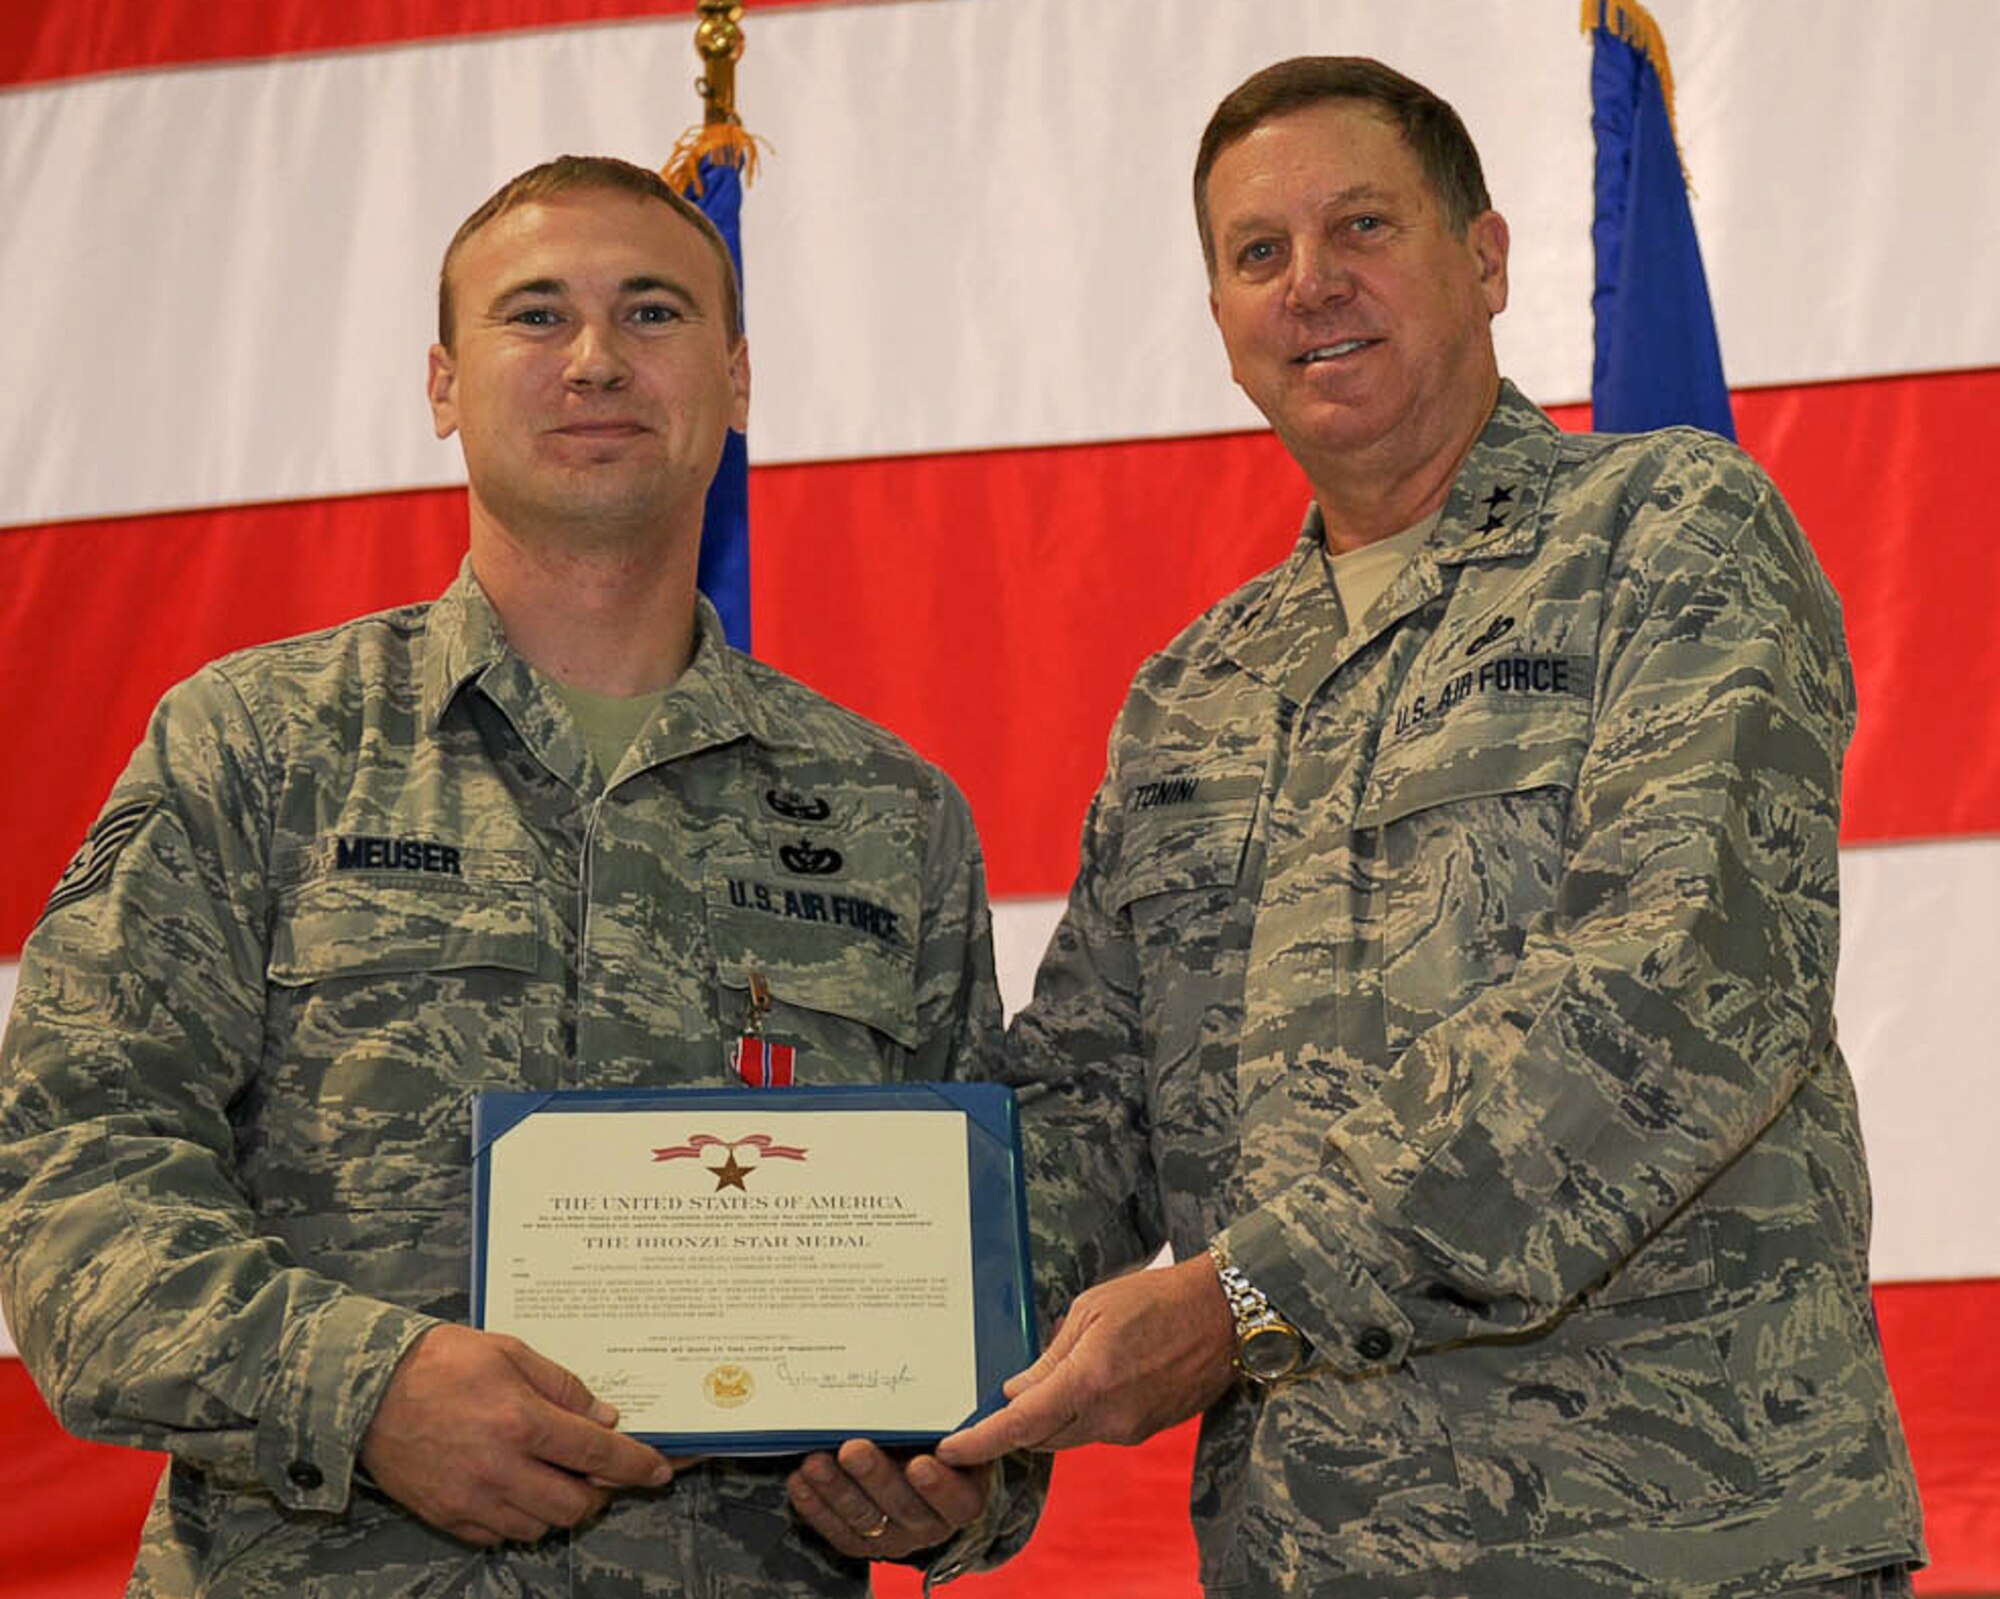 Kentucky???s adjutant general, Maj. Gen. Edward W. Tonini (right), presents Tech. Sgt. Matthew J. Meuser of the 123rd Civil Engineer Squadron with a Bronze Star Medal during a ceremony held Nov. 20, 2011, at the Kentucky Air National Guard Base in Louisville, Ky.  Meuser earned the combat decoration for his exceptionally meritorious service while deployed to Afghanistan as an explosive ordnance disposal team leader supporting Operation Enduring Freedom. (U.S. Air Force photo by Tech. Sgt. Dennis Flora)